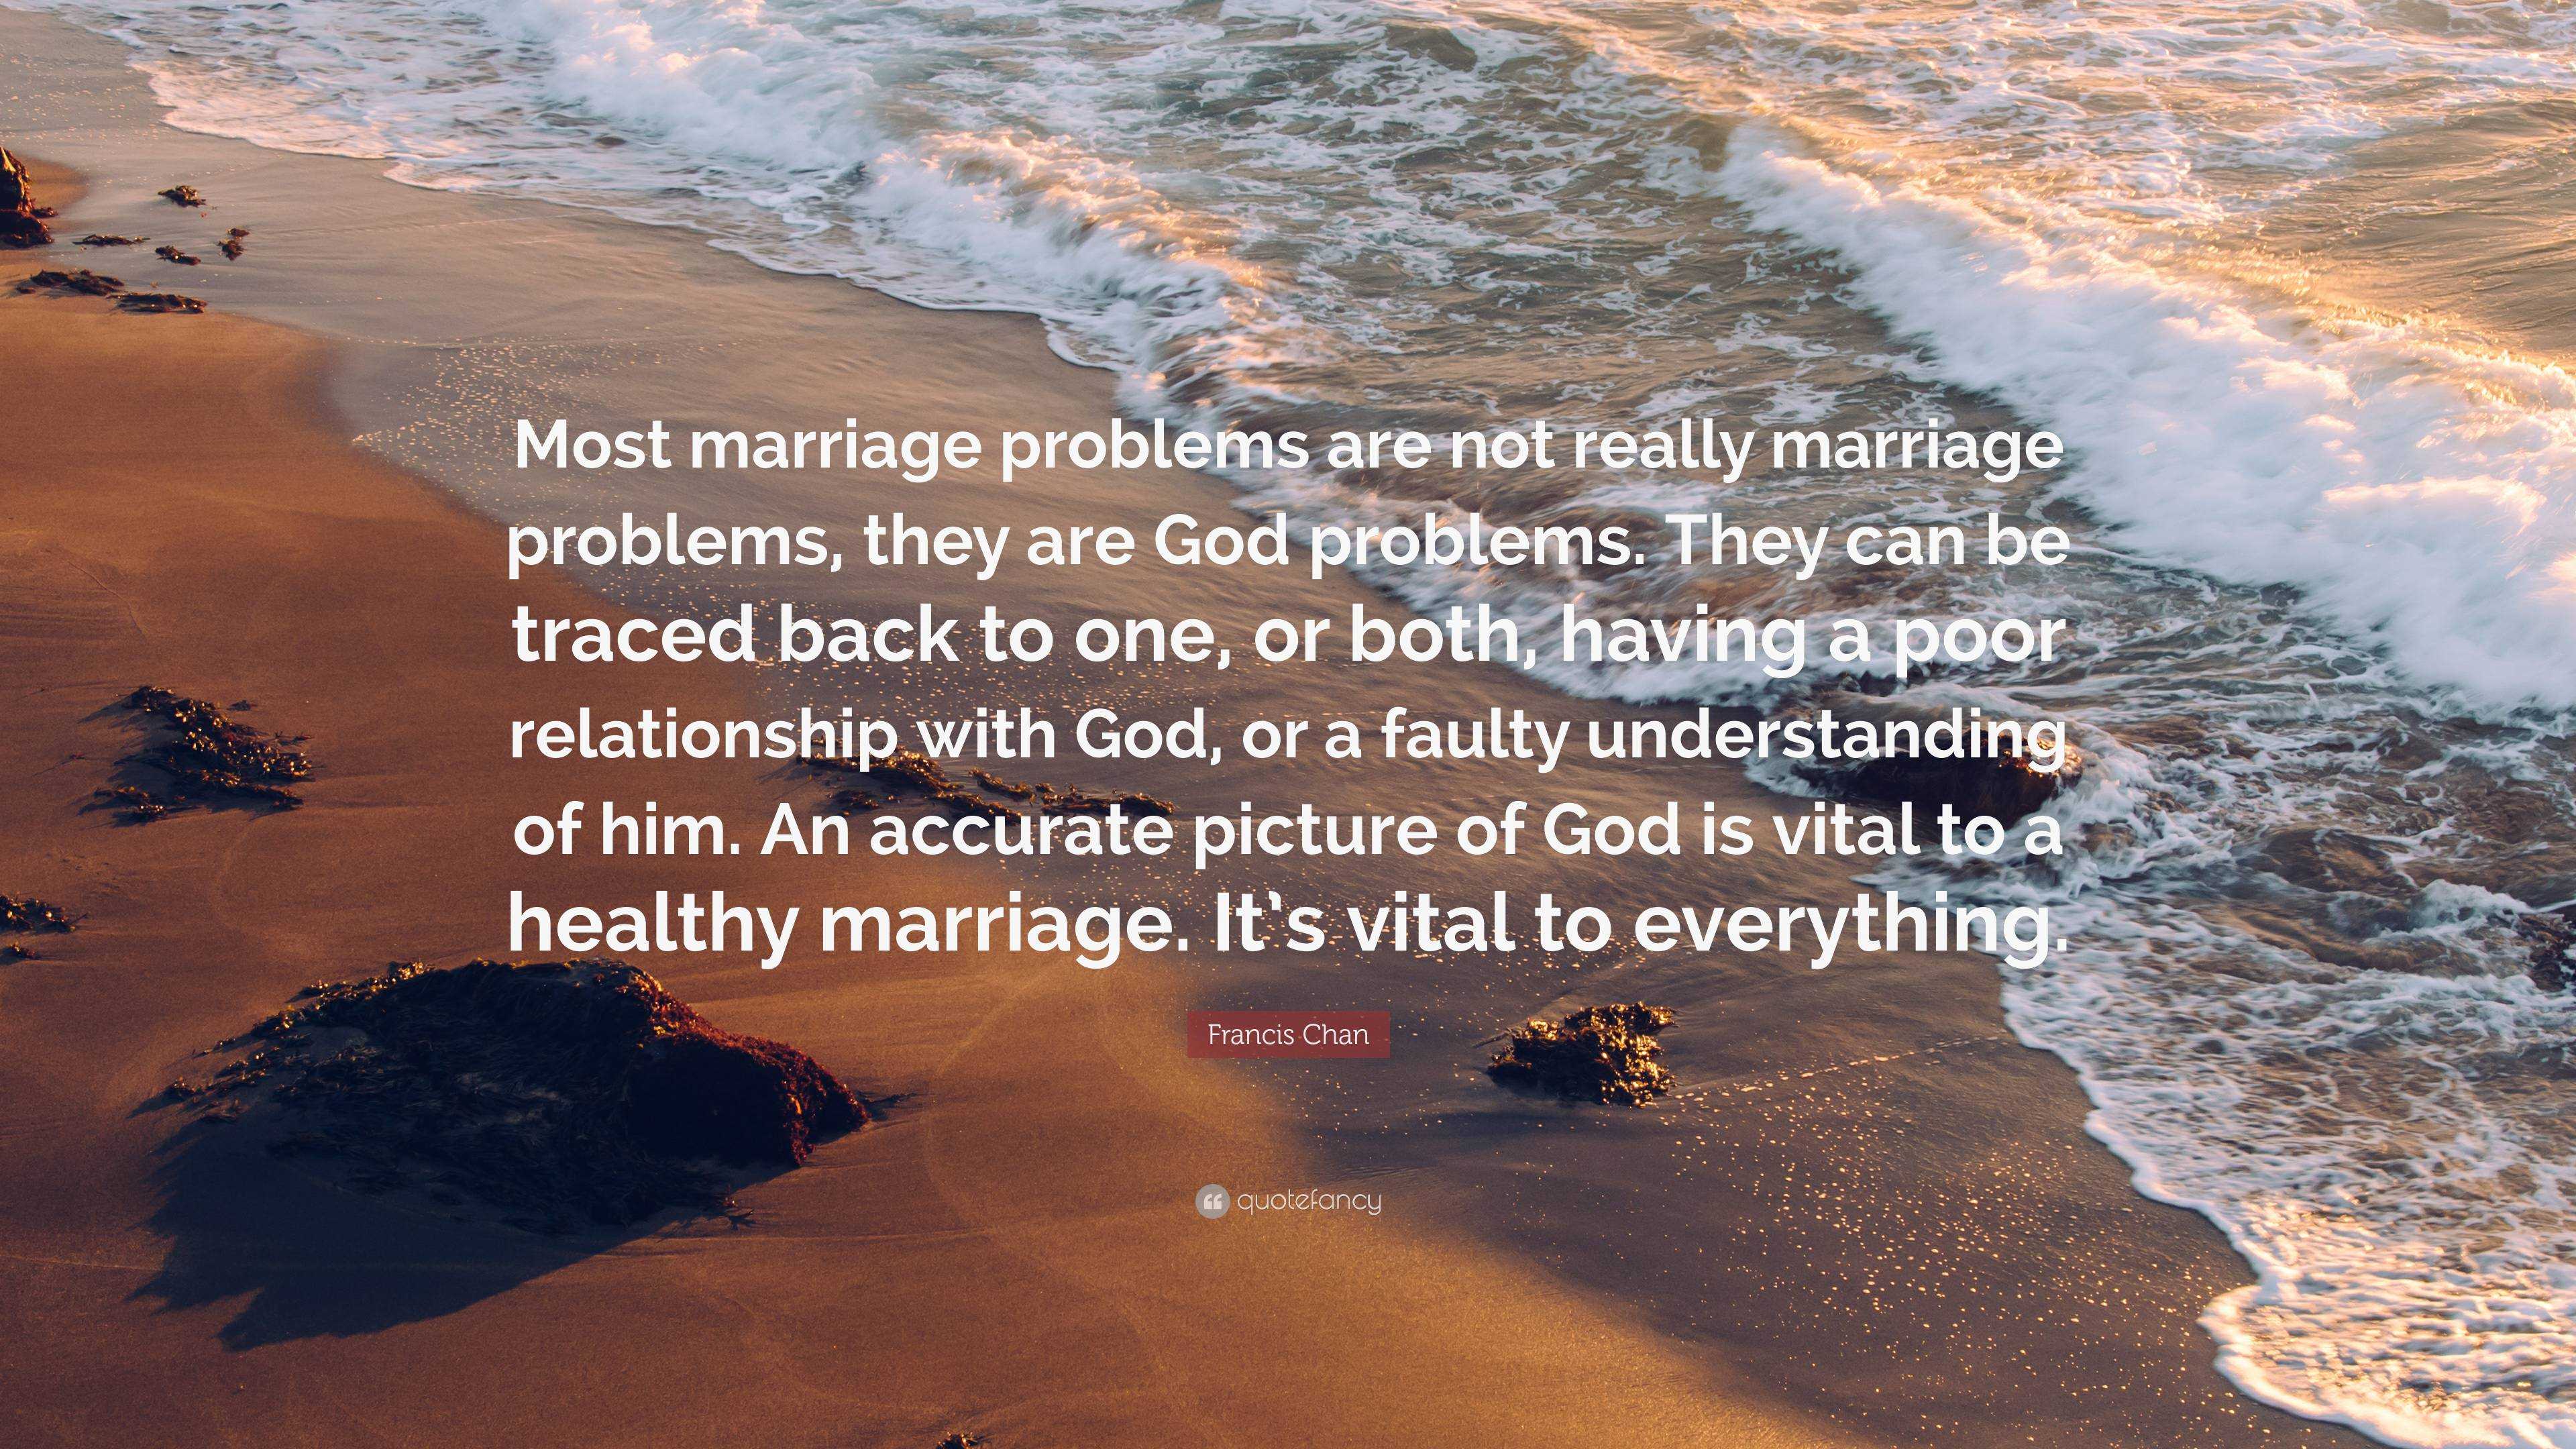 Quotes for couples having problems